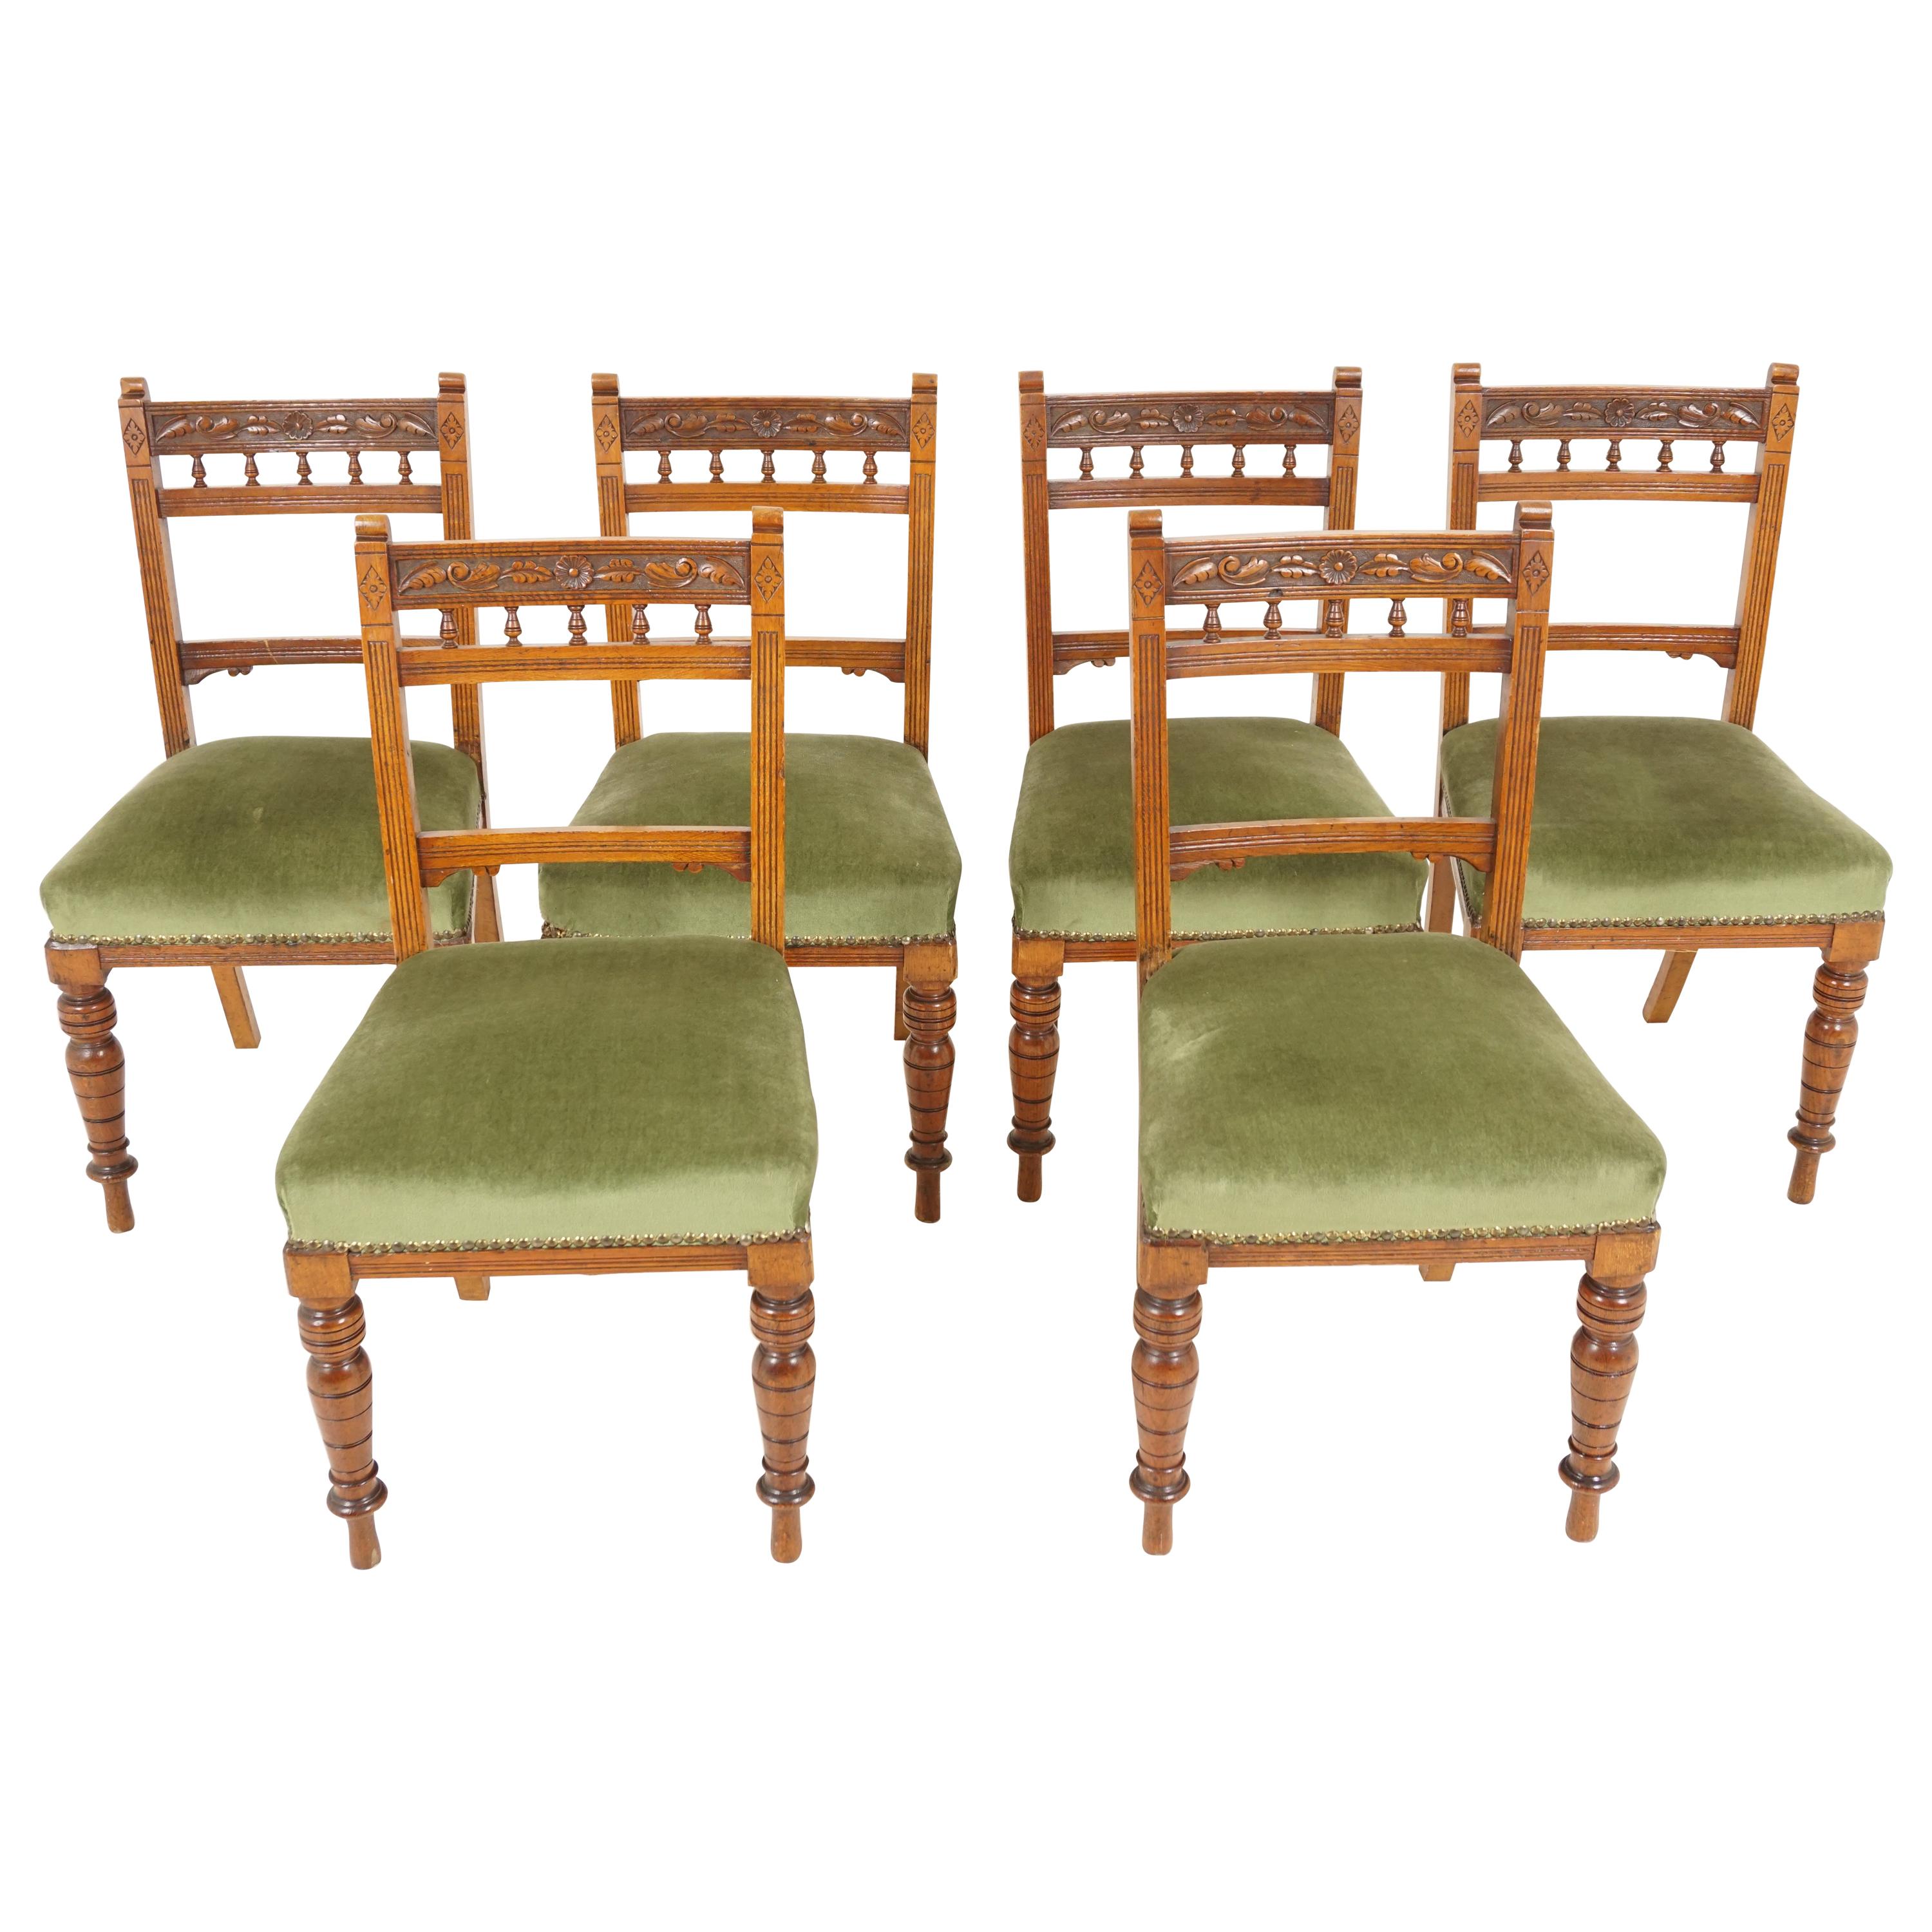 Antique Victorian Chairs, Set of 6 Carved Oak Dining Chairs, Scotland 1890 B2086